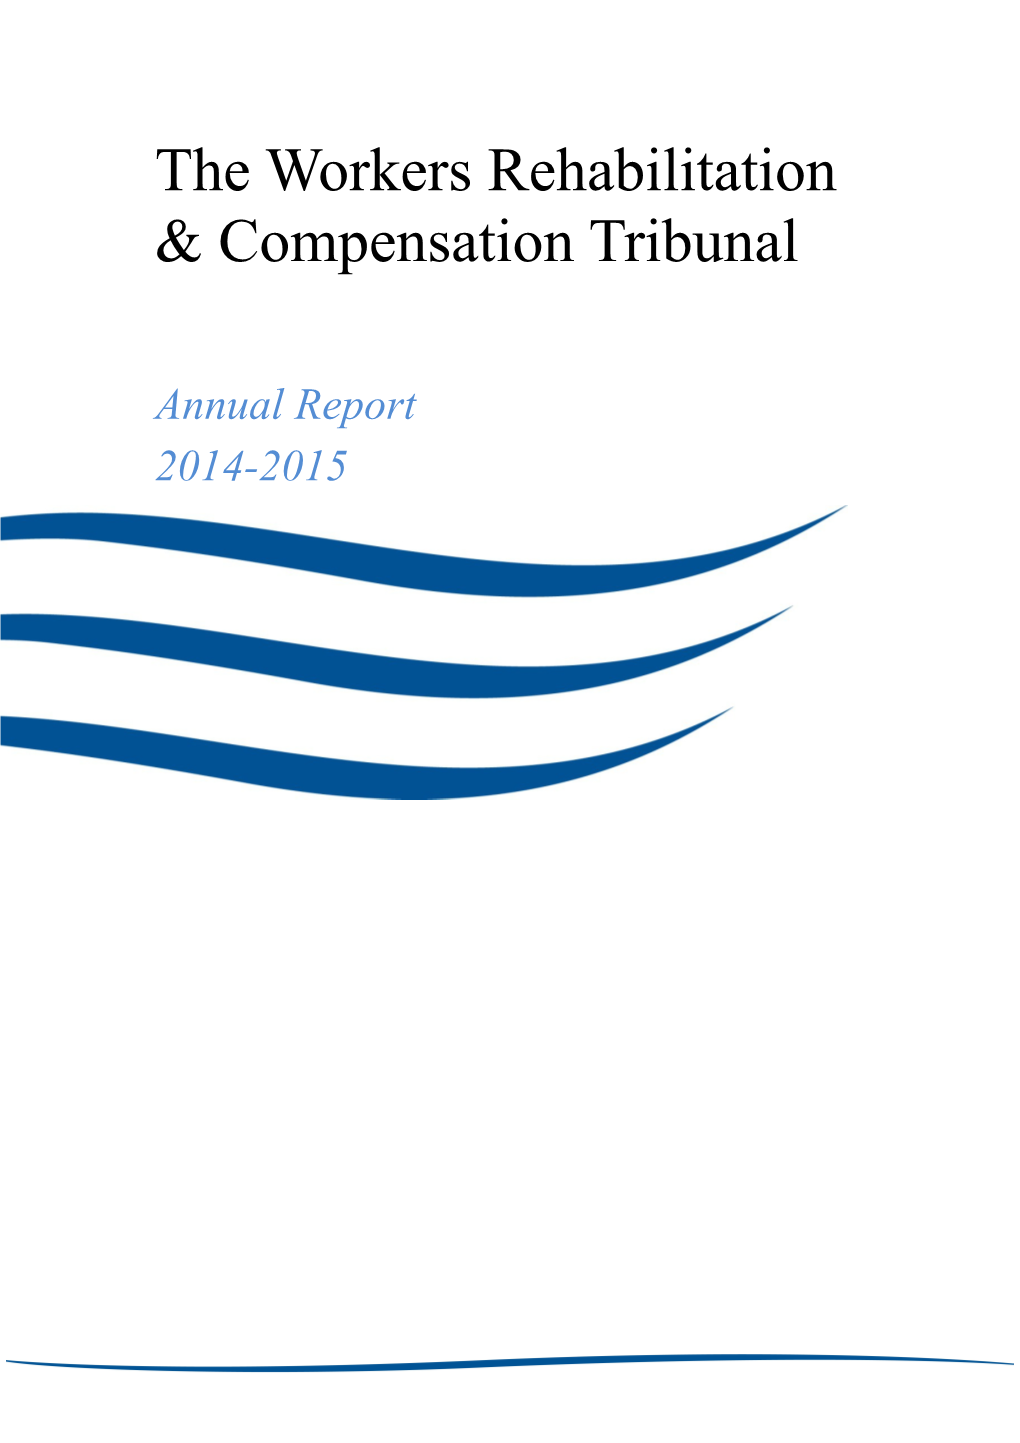 The Workers Rehabilitation & Compensation Tribunal Annual Report 2014 - 2015